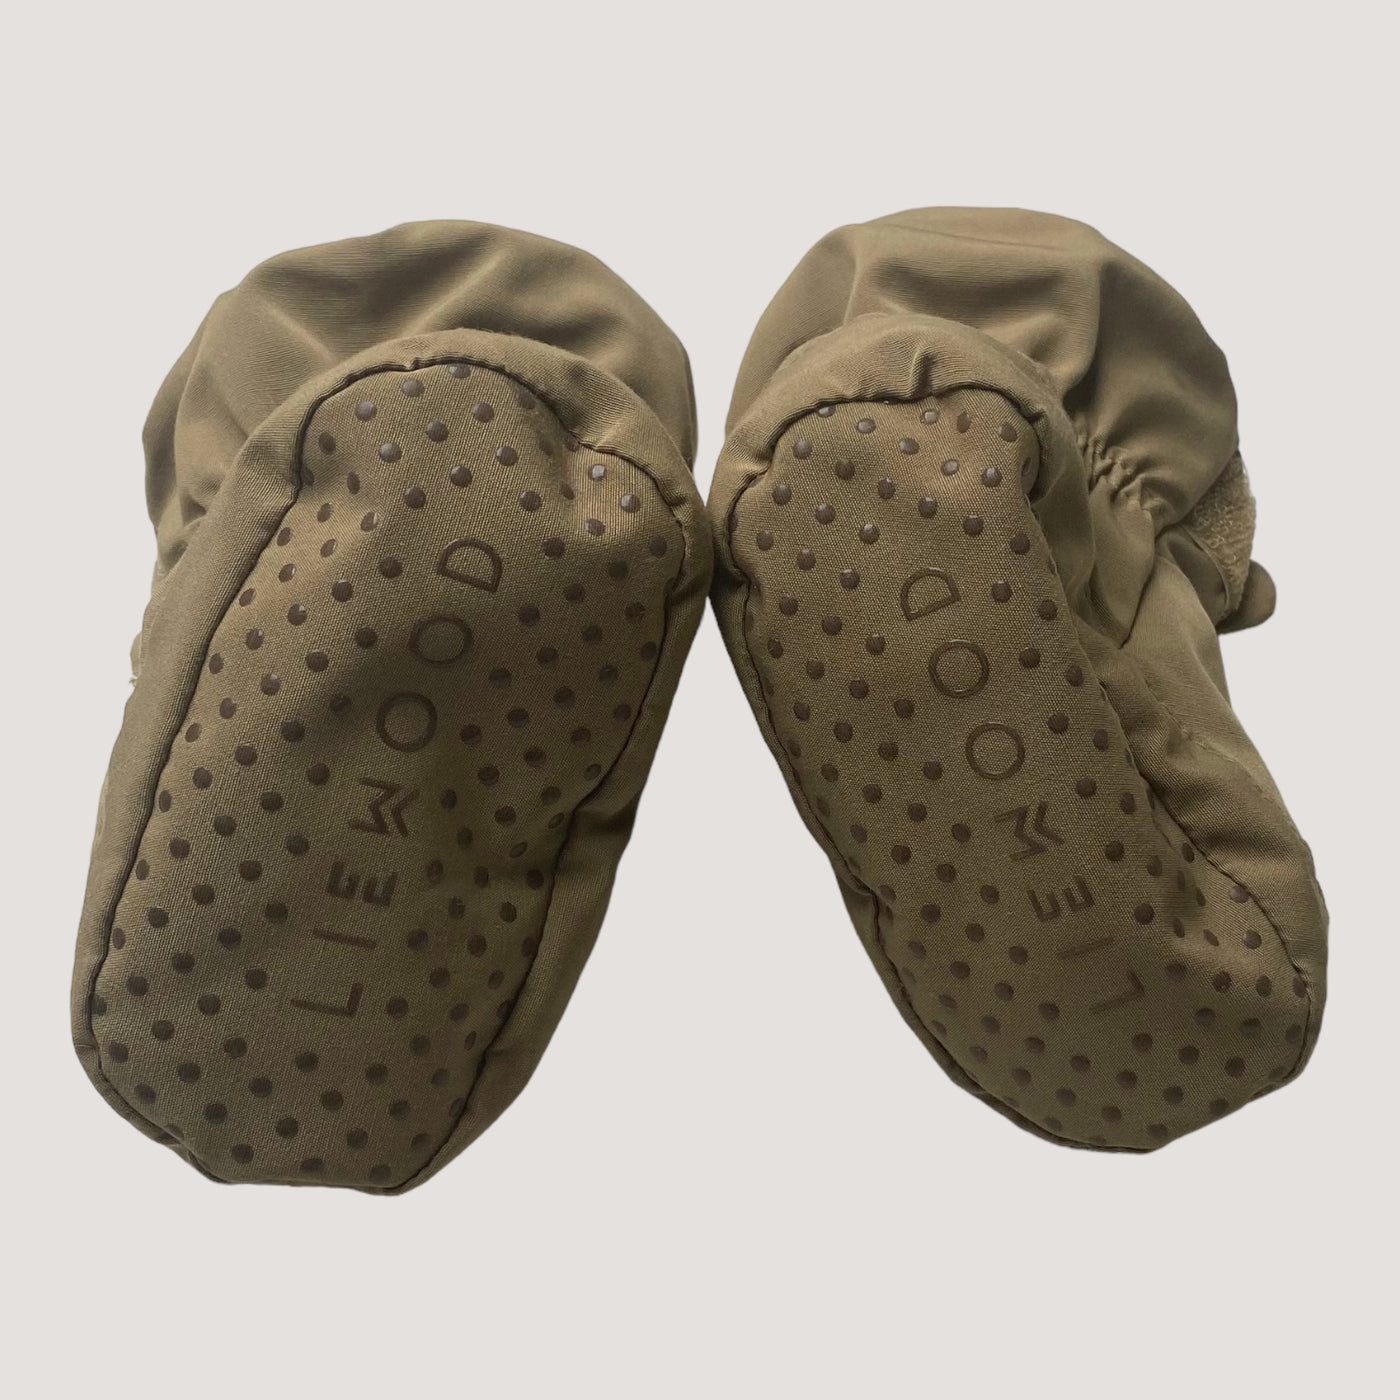 Liewood baby winter boots, tan | 3-6m